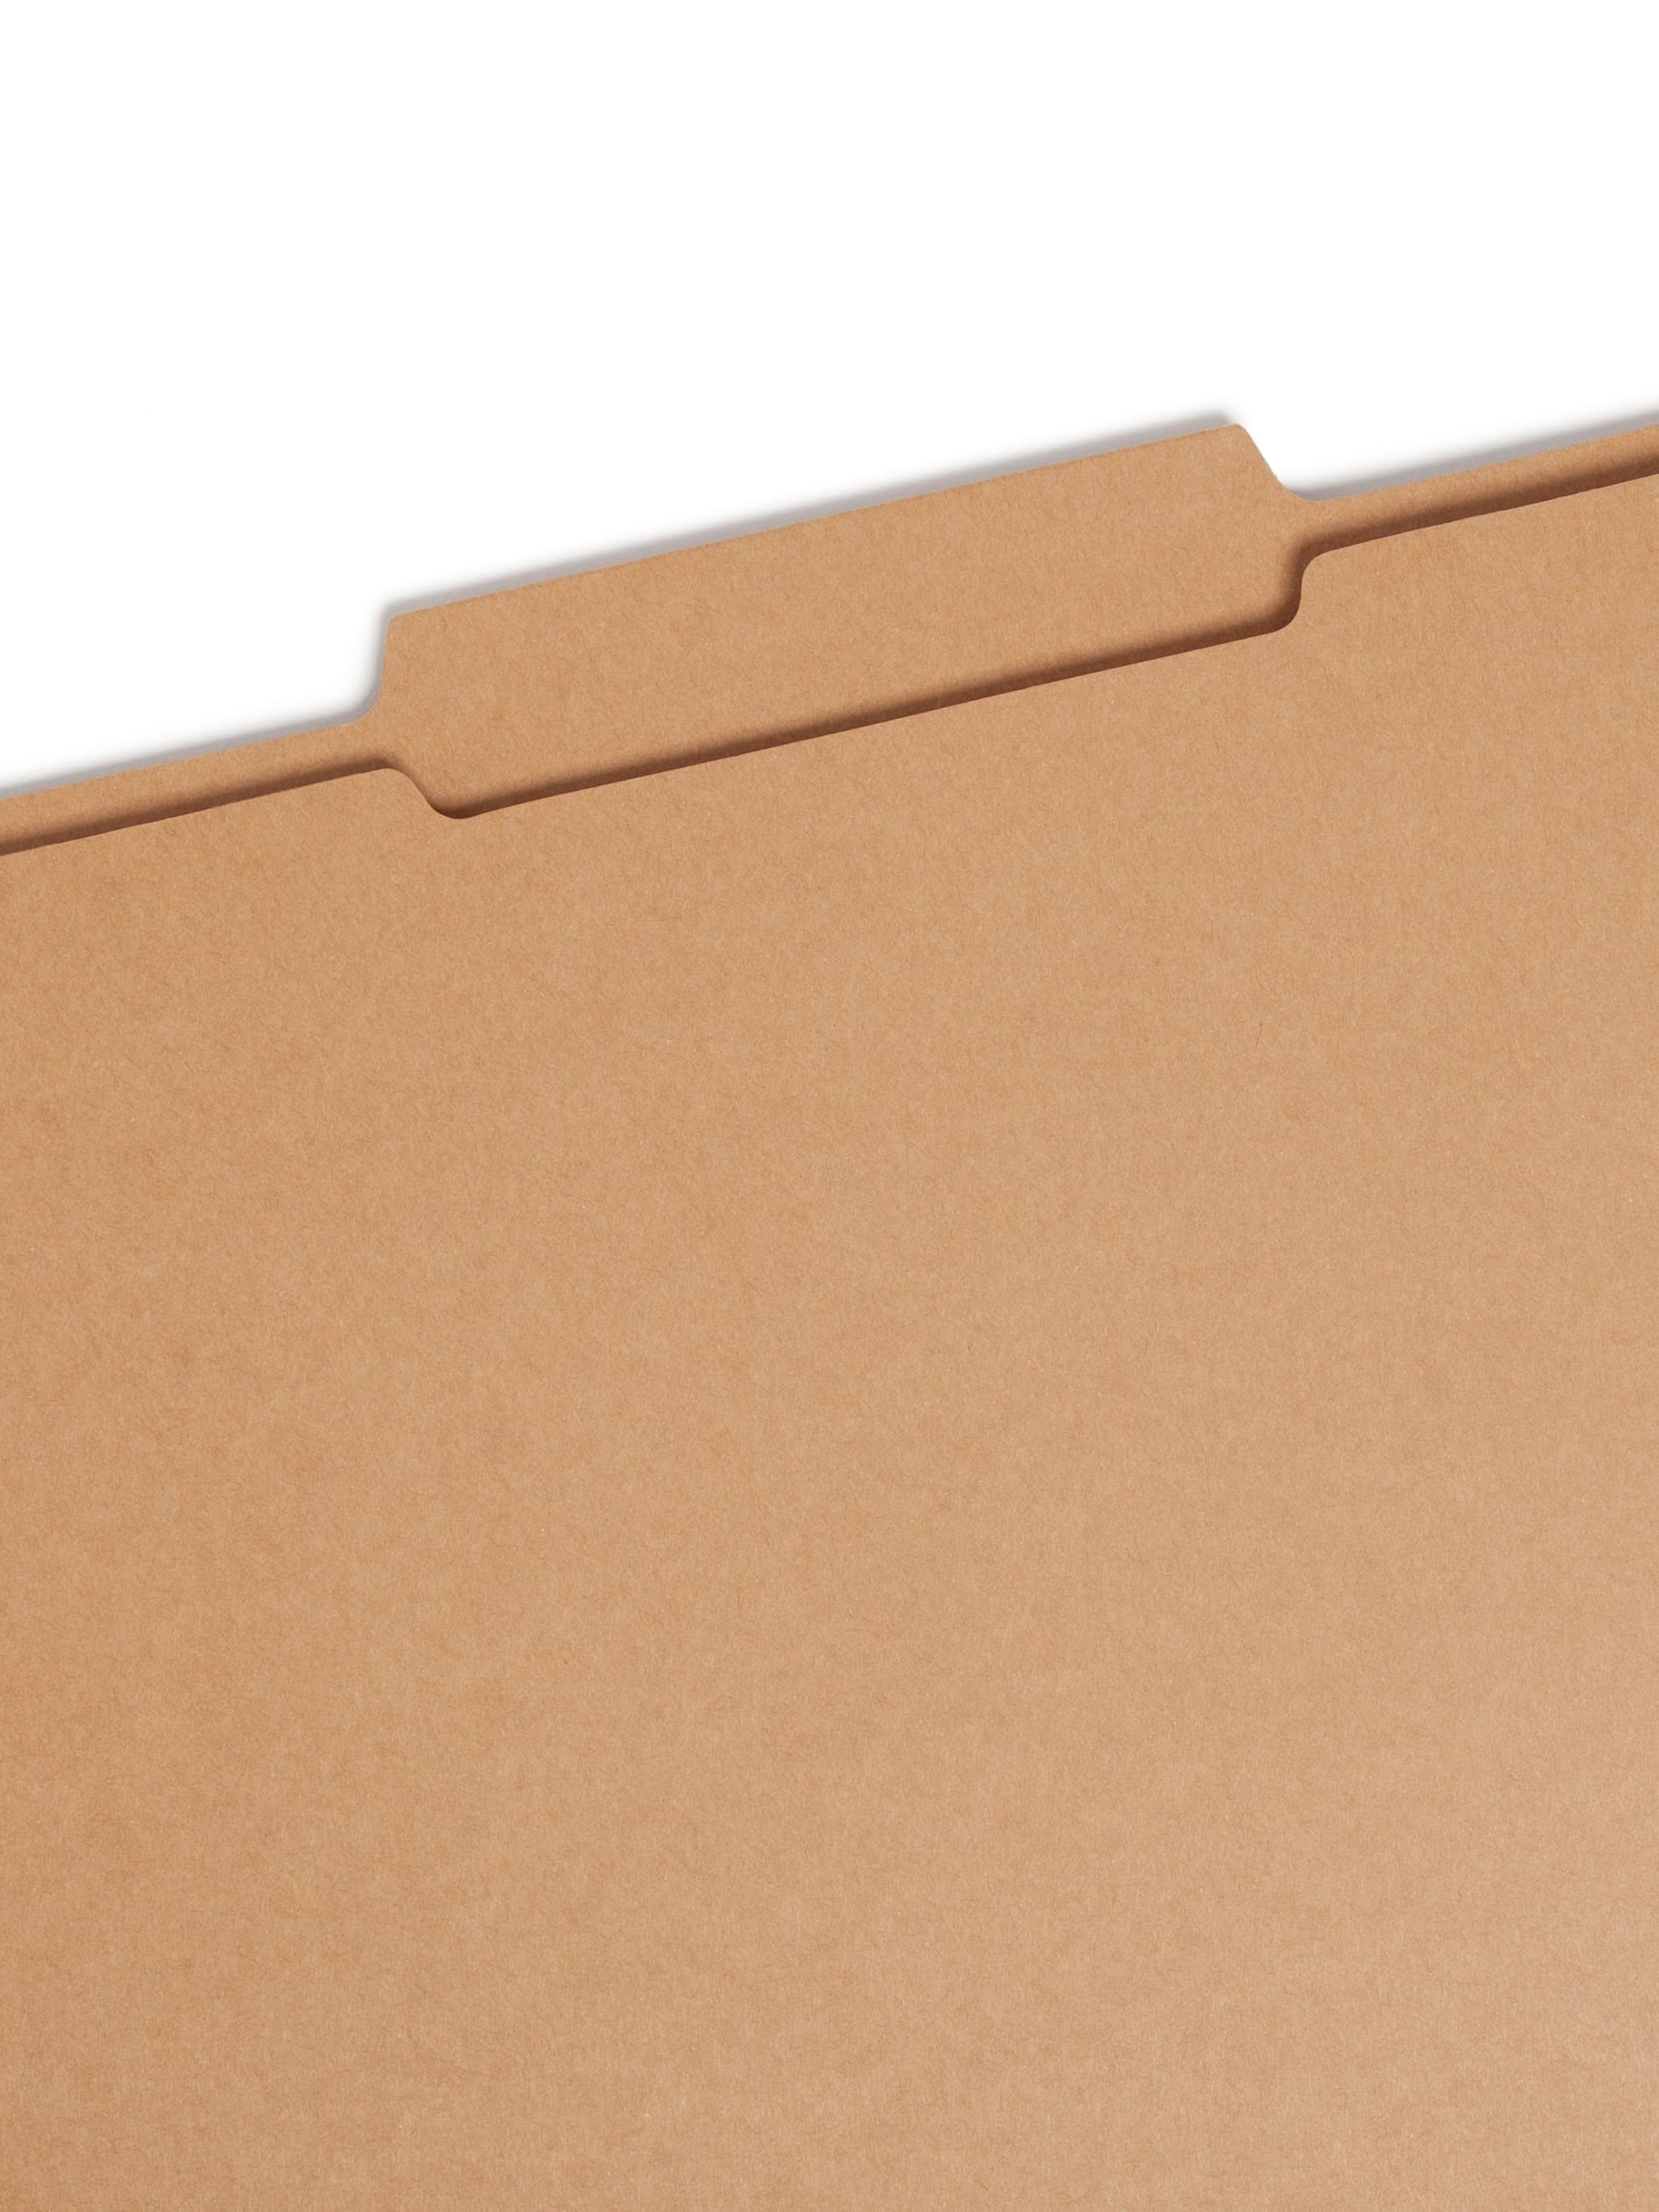 Reinforced Tab File Folders, 2/5-Cut Right of Center Tab, Kraft Color, Letter Size, Set of 100, 086486107761